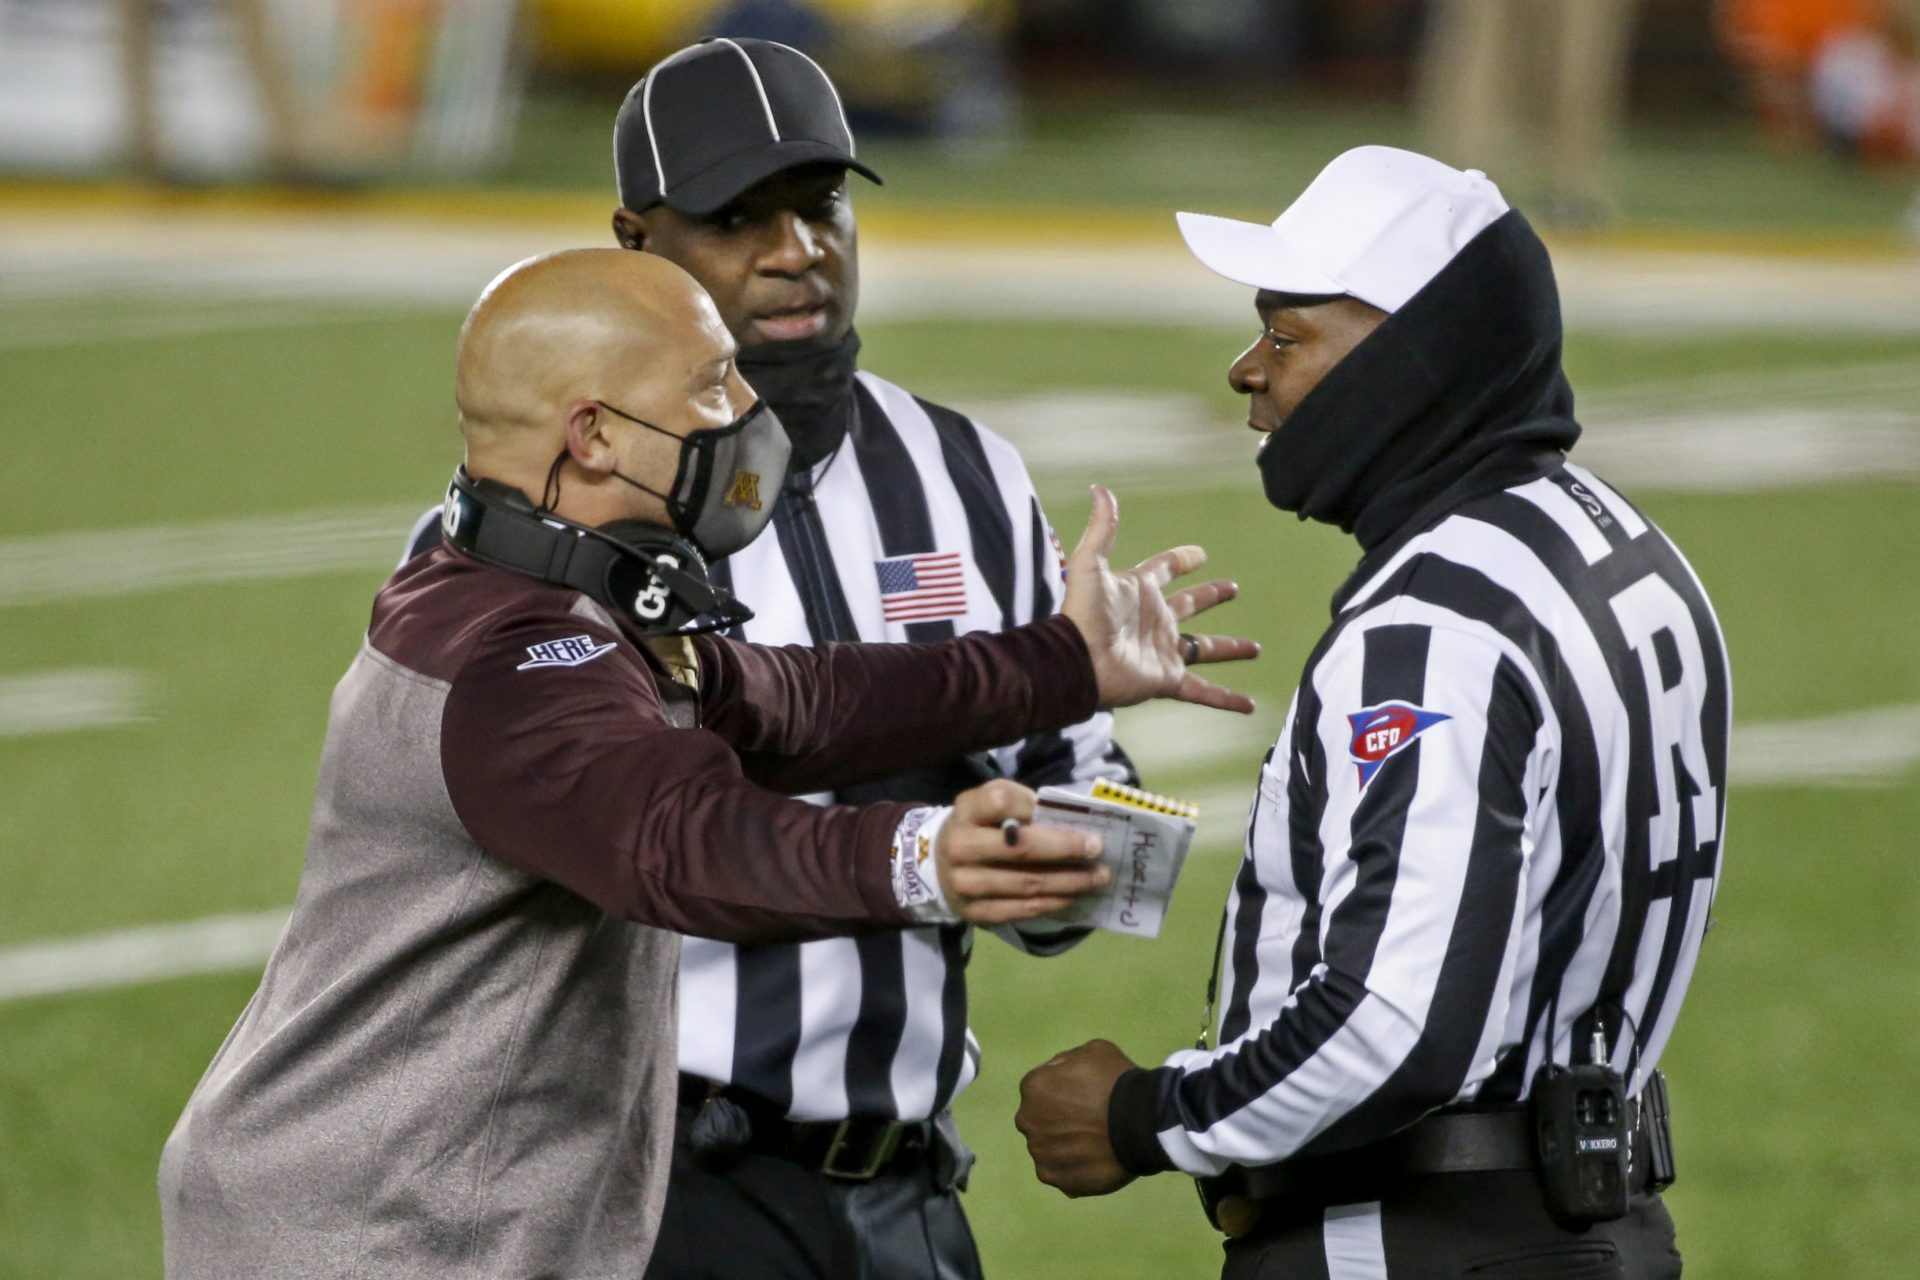 Minnesota head coach P.J. Fleck has a discussion with referee Larry Smith and headline judge William McKoy during a break in action at an NCAA college football game with Michigan Saturday, Oct. 24, 2020, in Minneapolis.